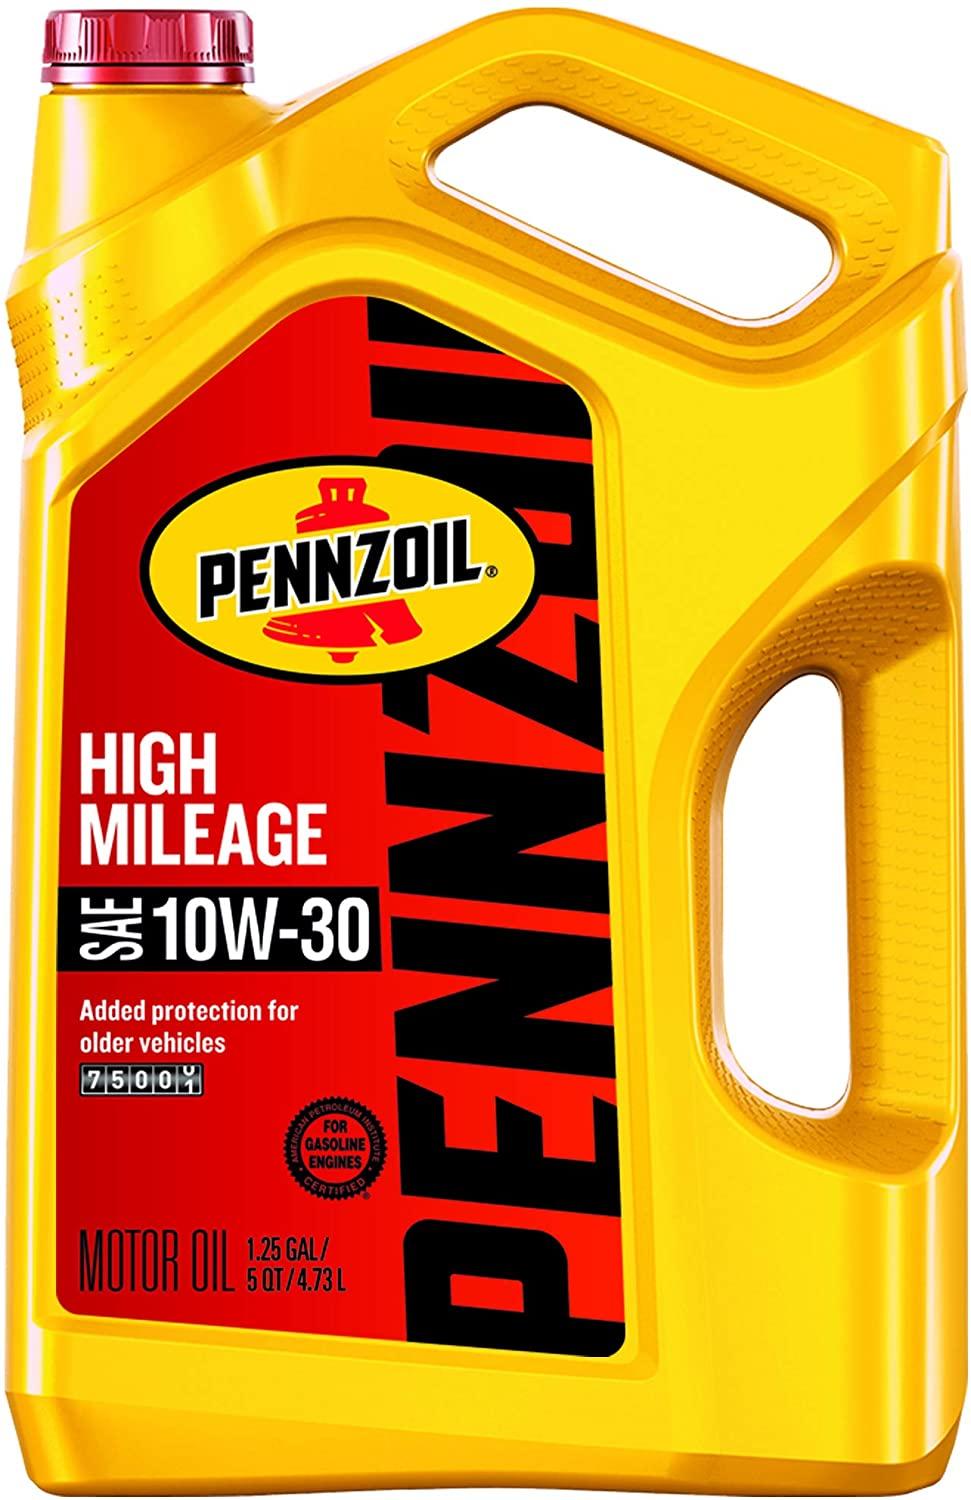 Pennzoil High Mileage Mineral Oil